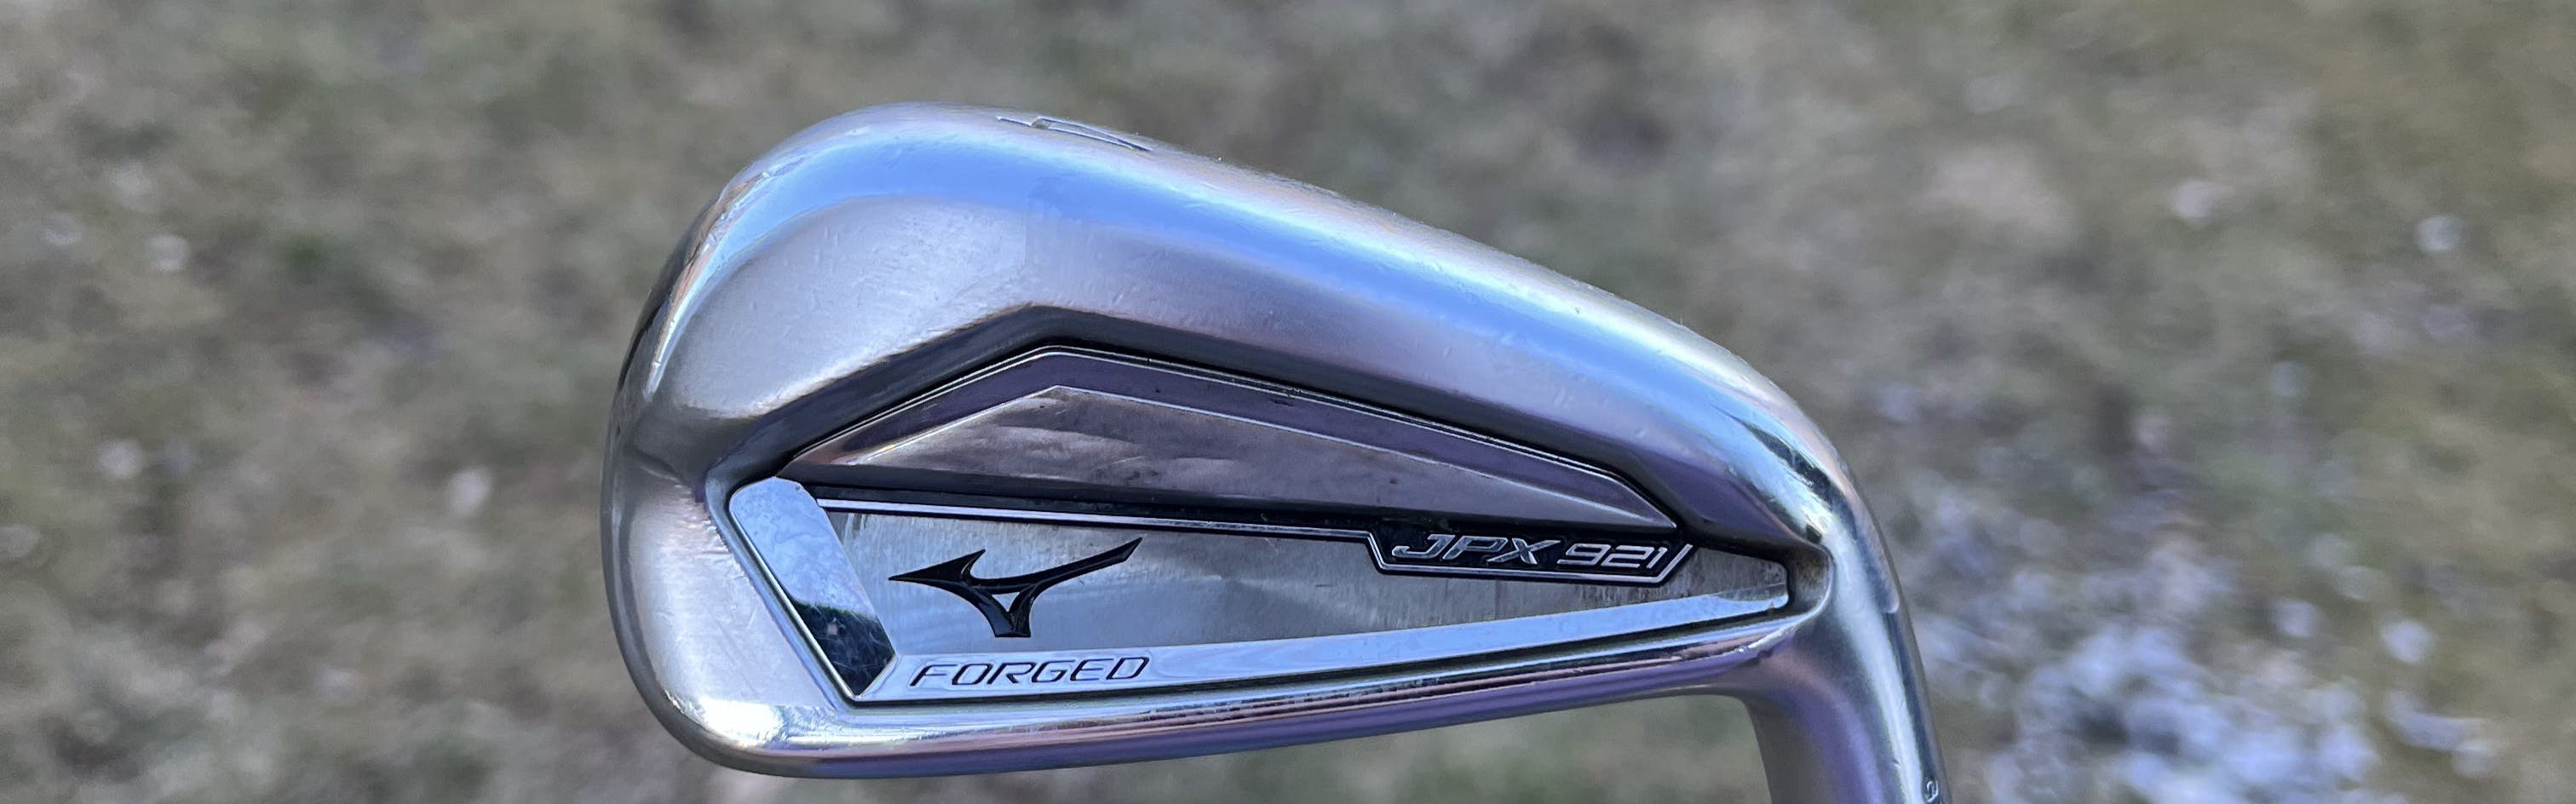 Expert Review: Mizuno JPX921 Forged Irons | Curated.com